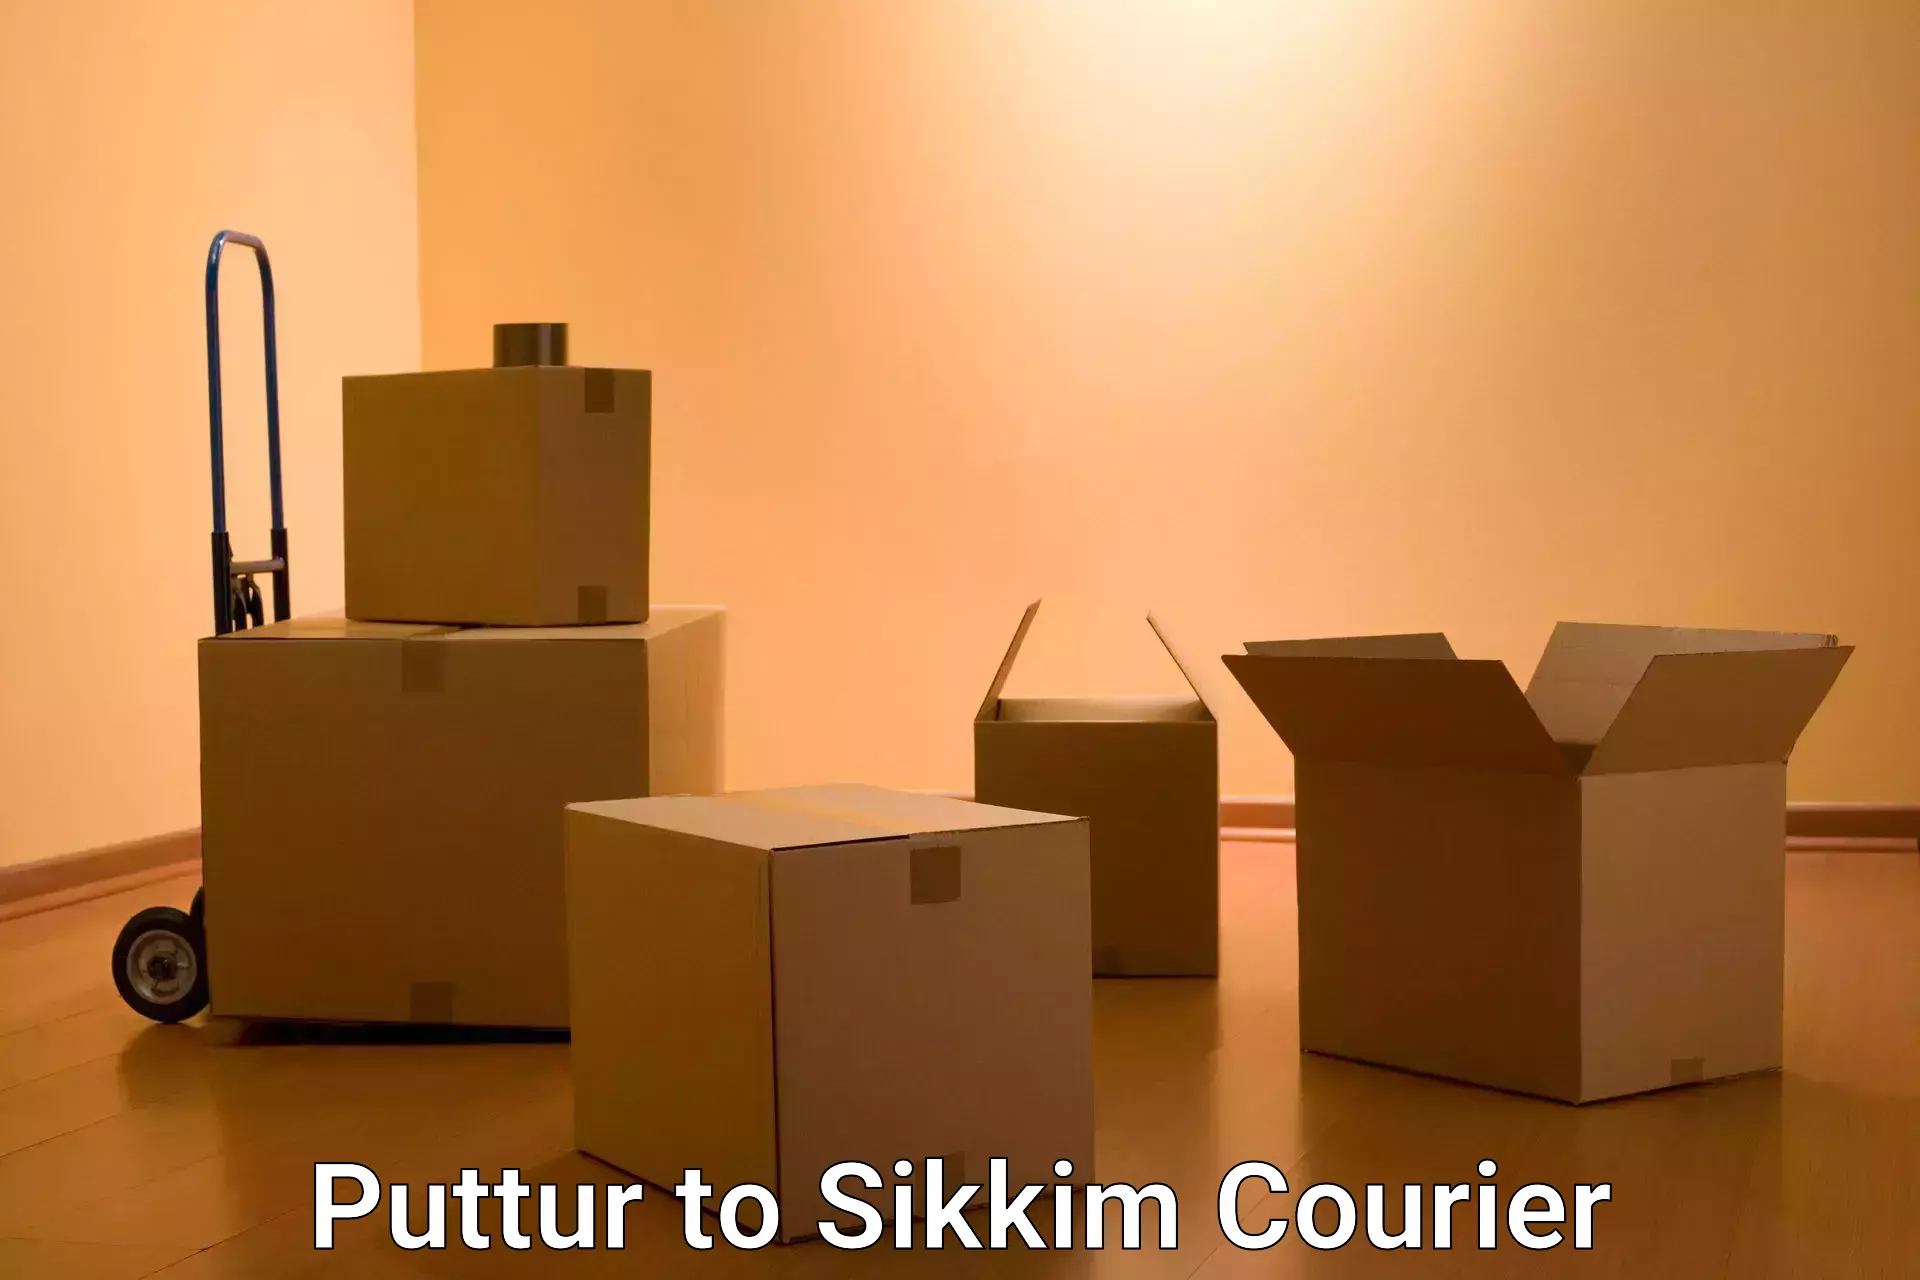 User-friendly delivery service Puttur to Sikkim